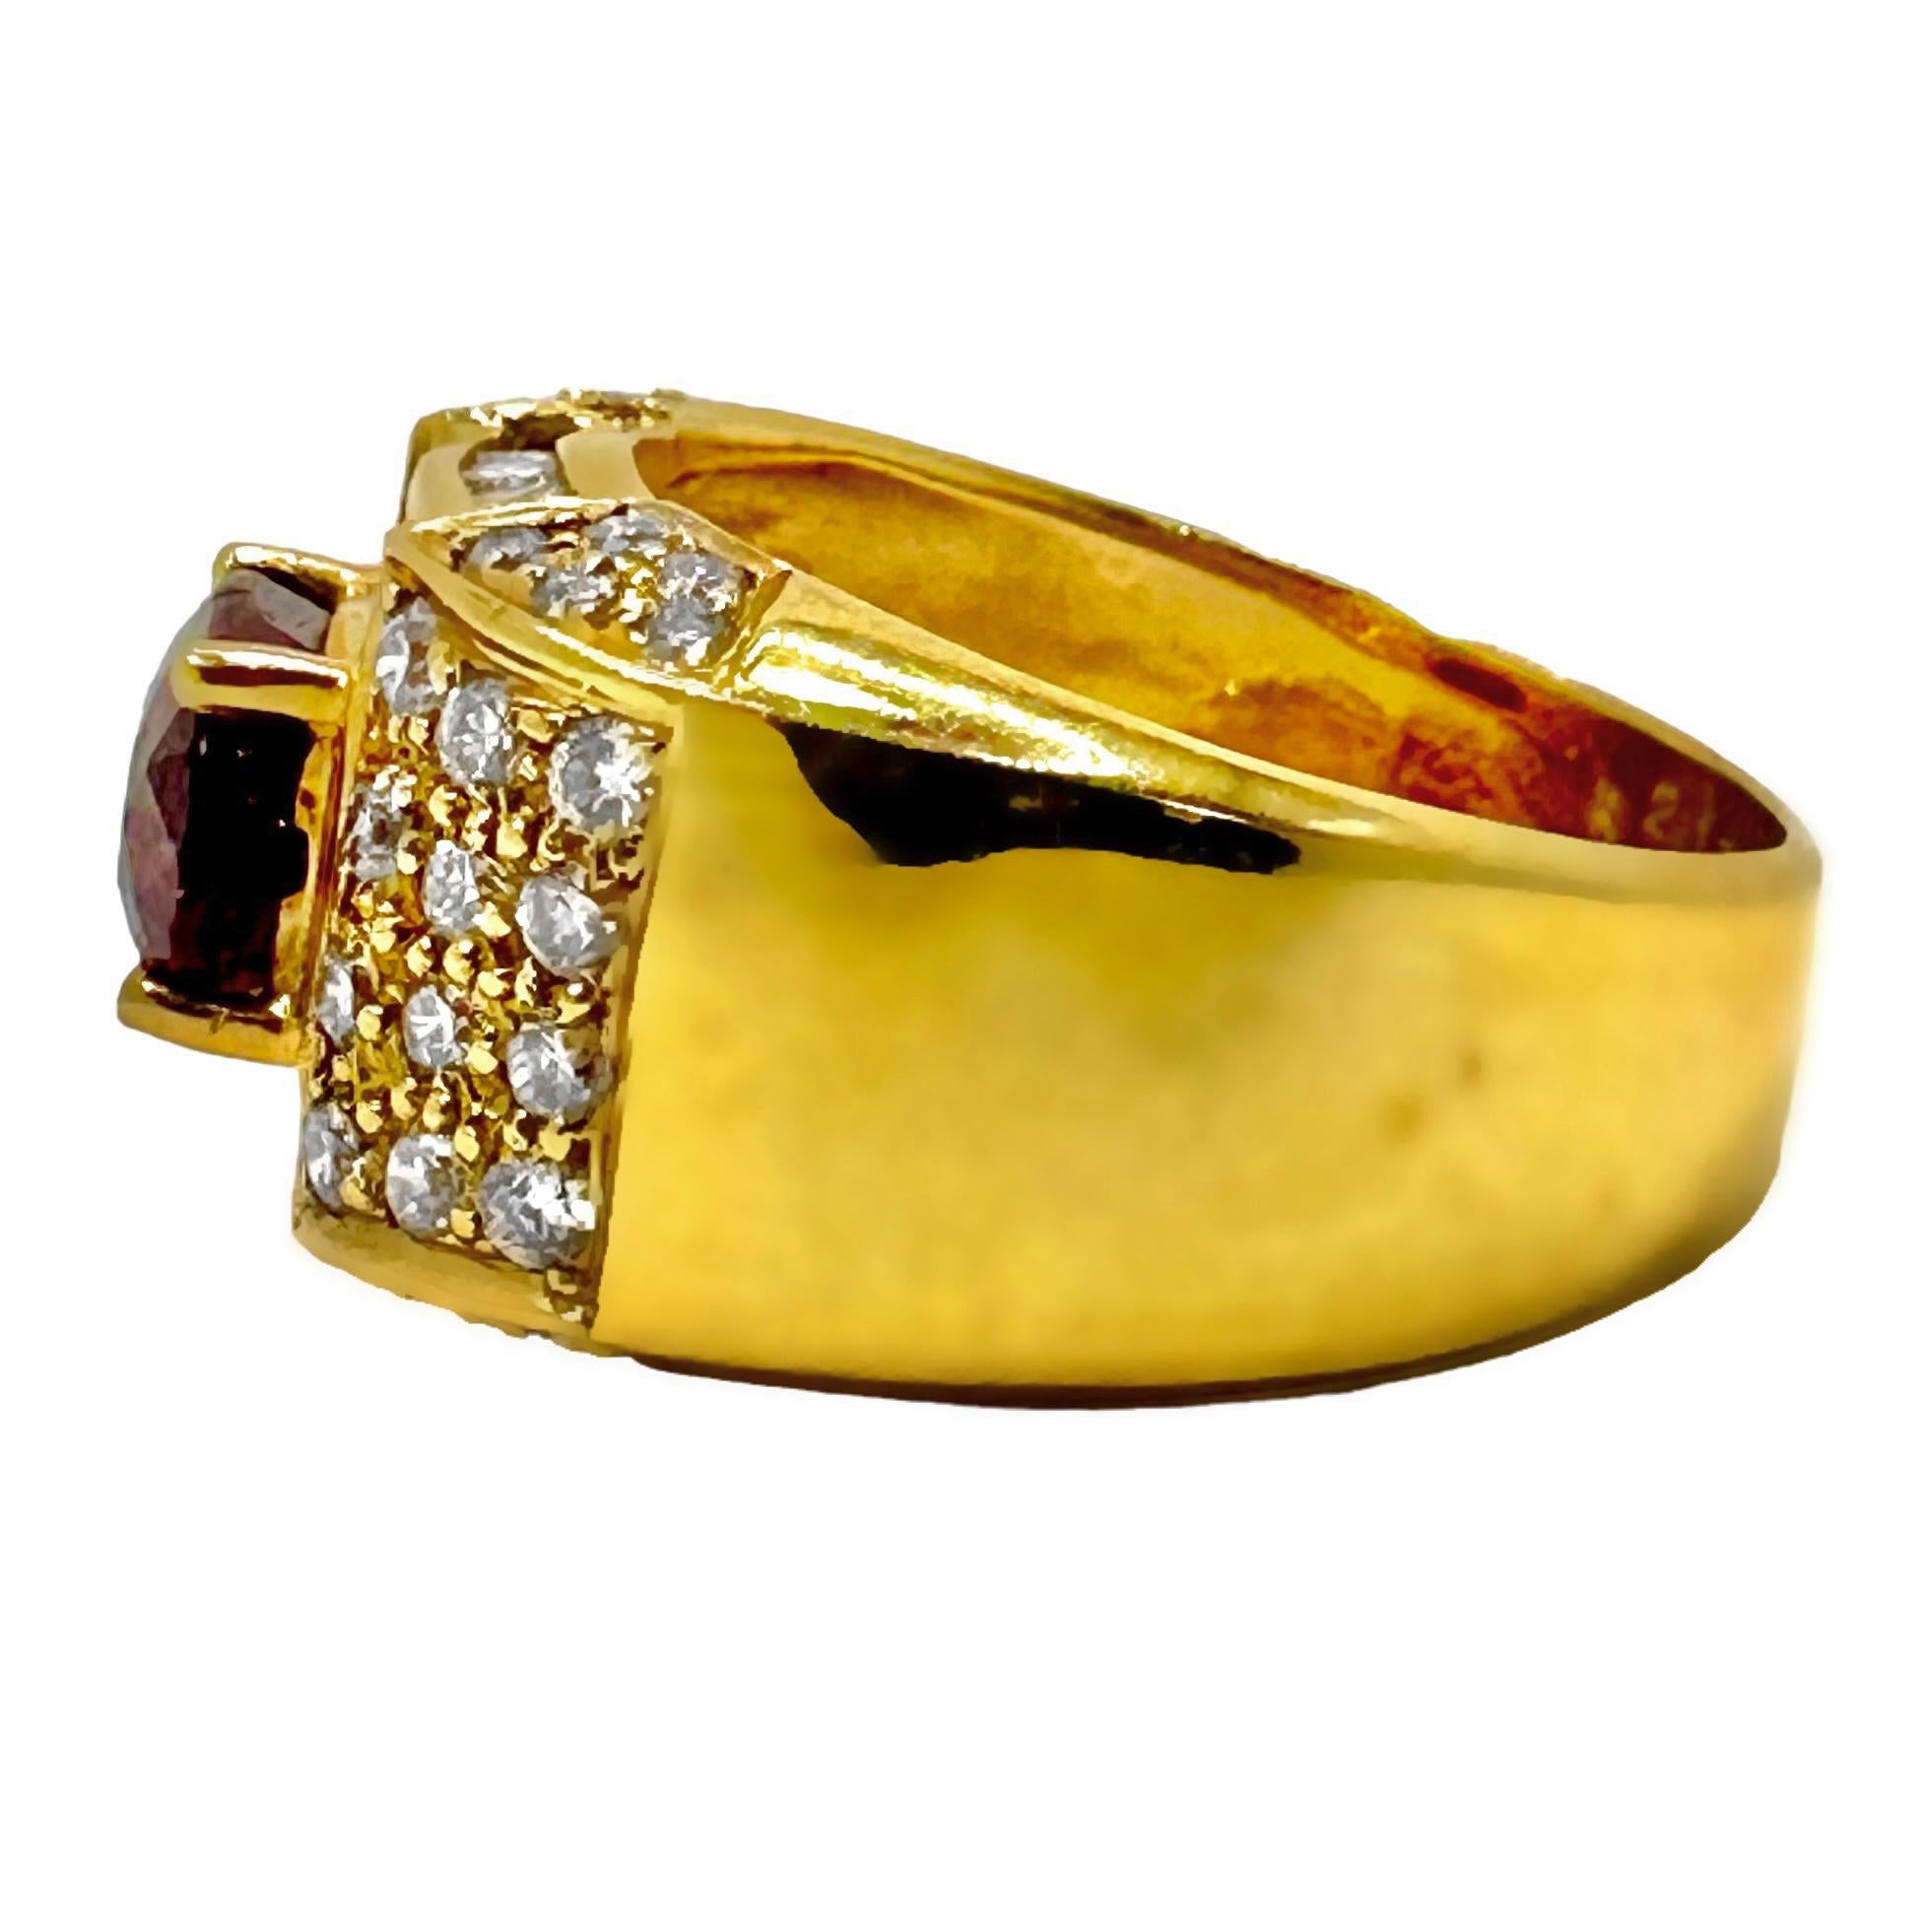 Late-20th Century Tailored 18k Yellow Gold, Ruby and Diamond Cocktail Ring In Good Condition For Sale In Palm Beach, FL